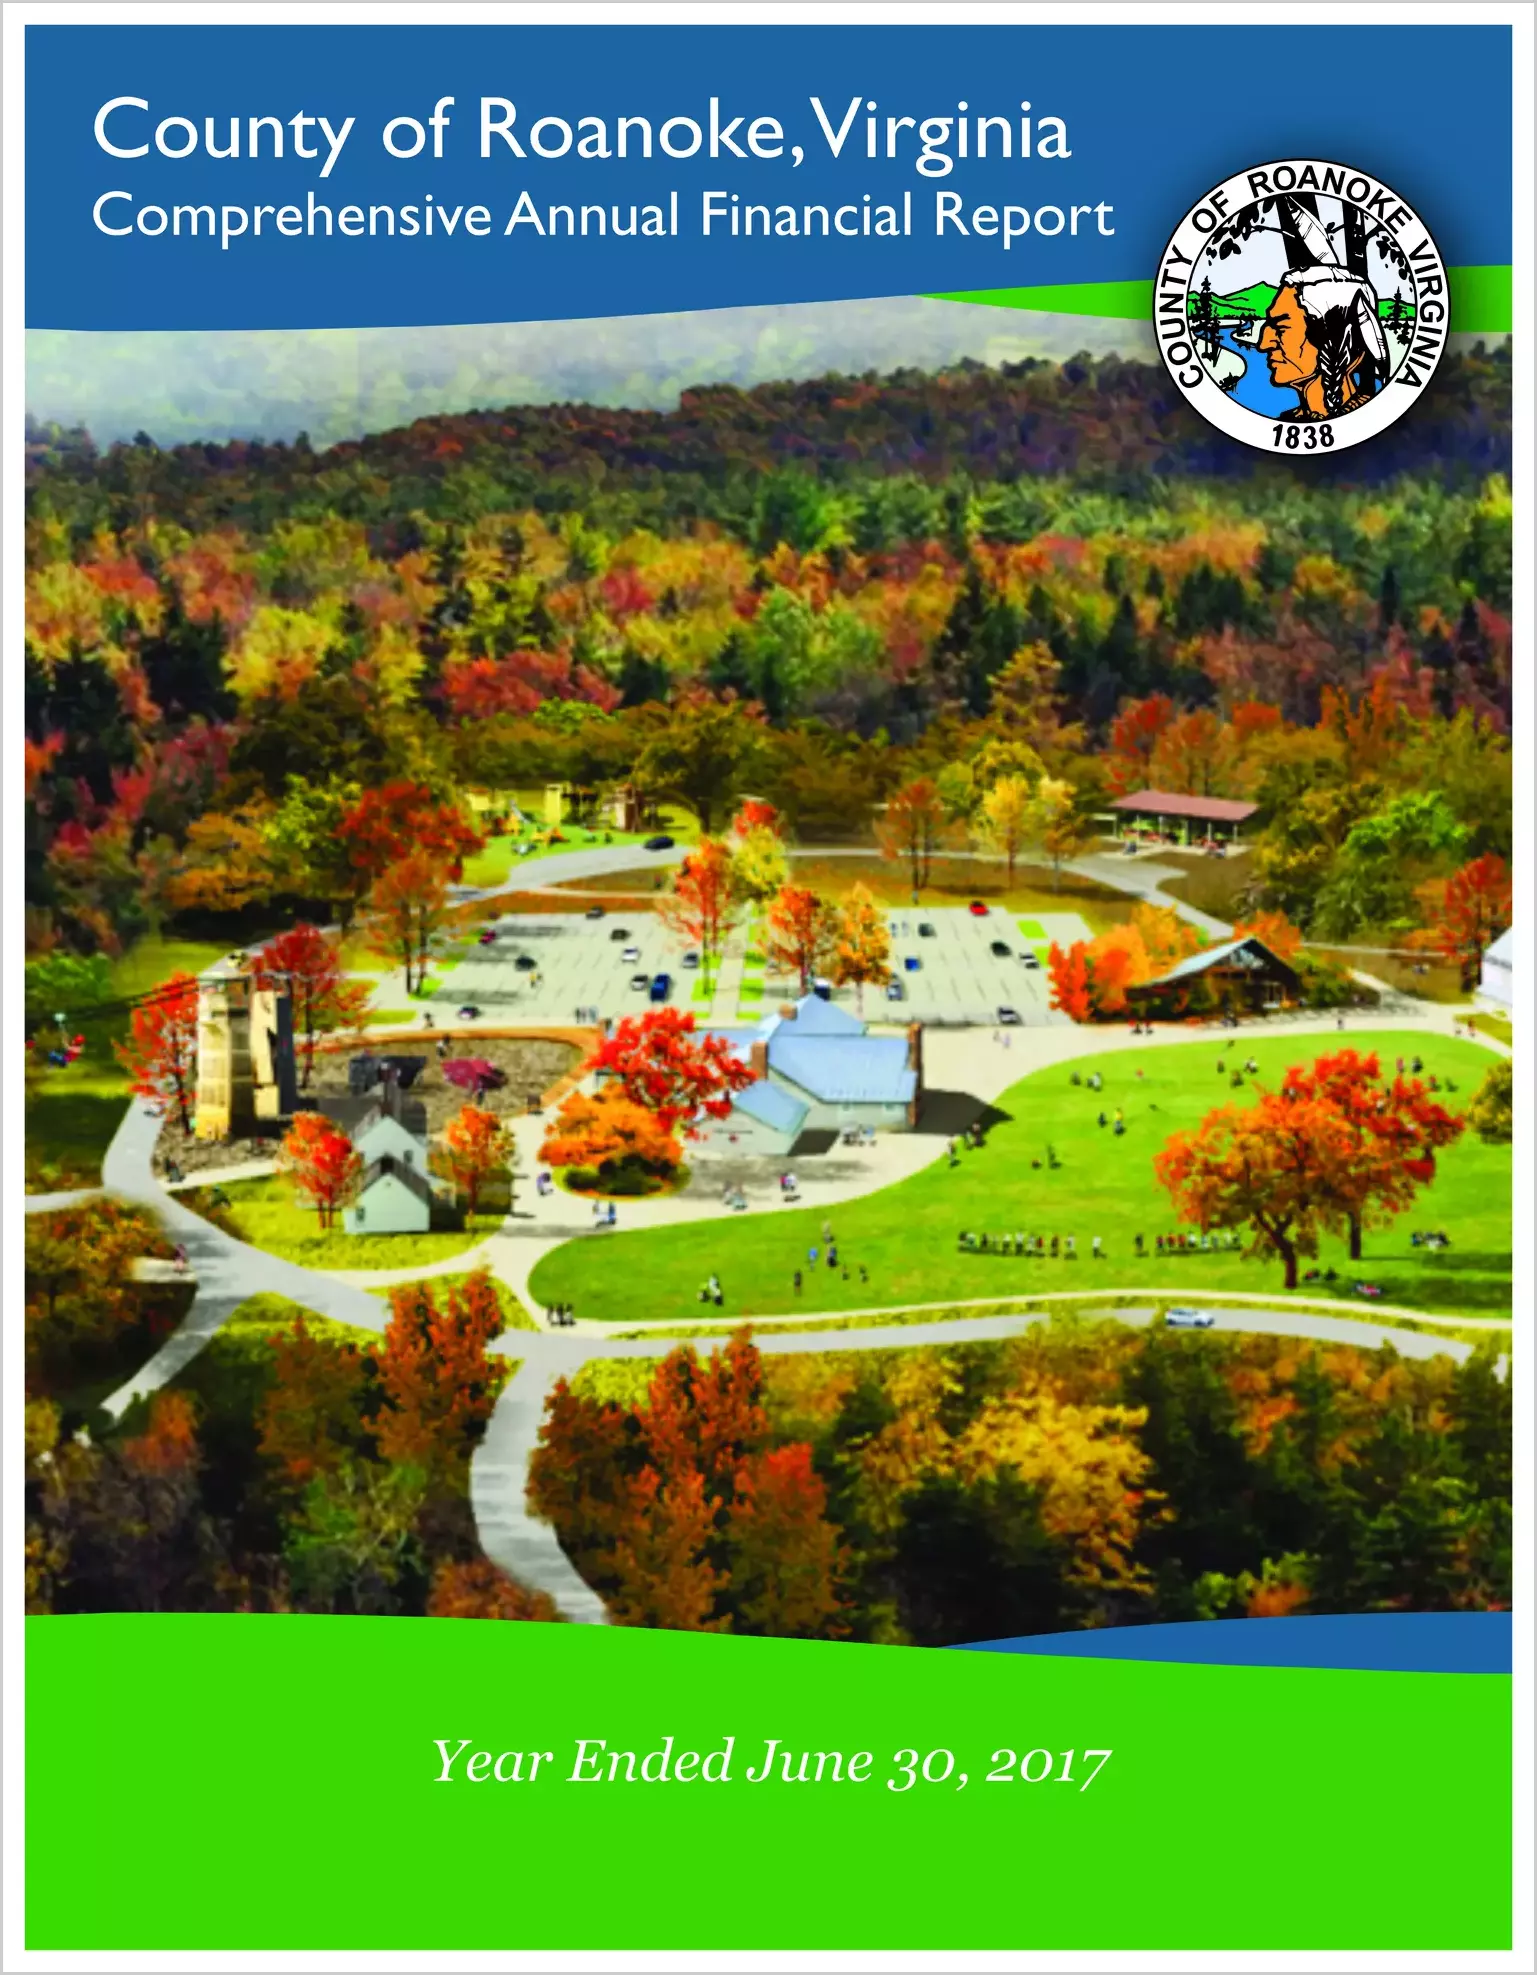 2017 Annual Financial Report for County of Roanoke